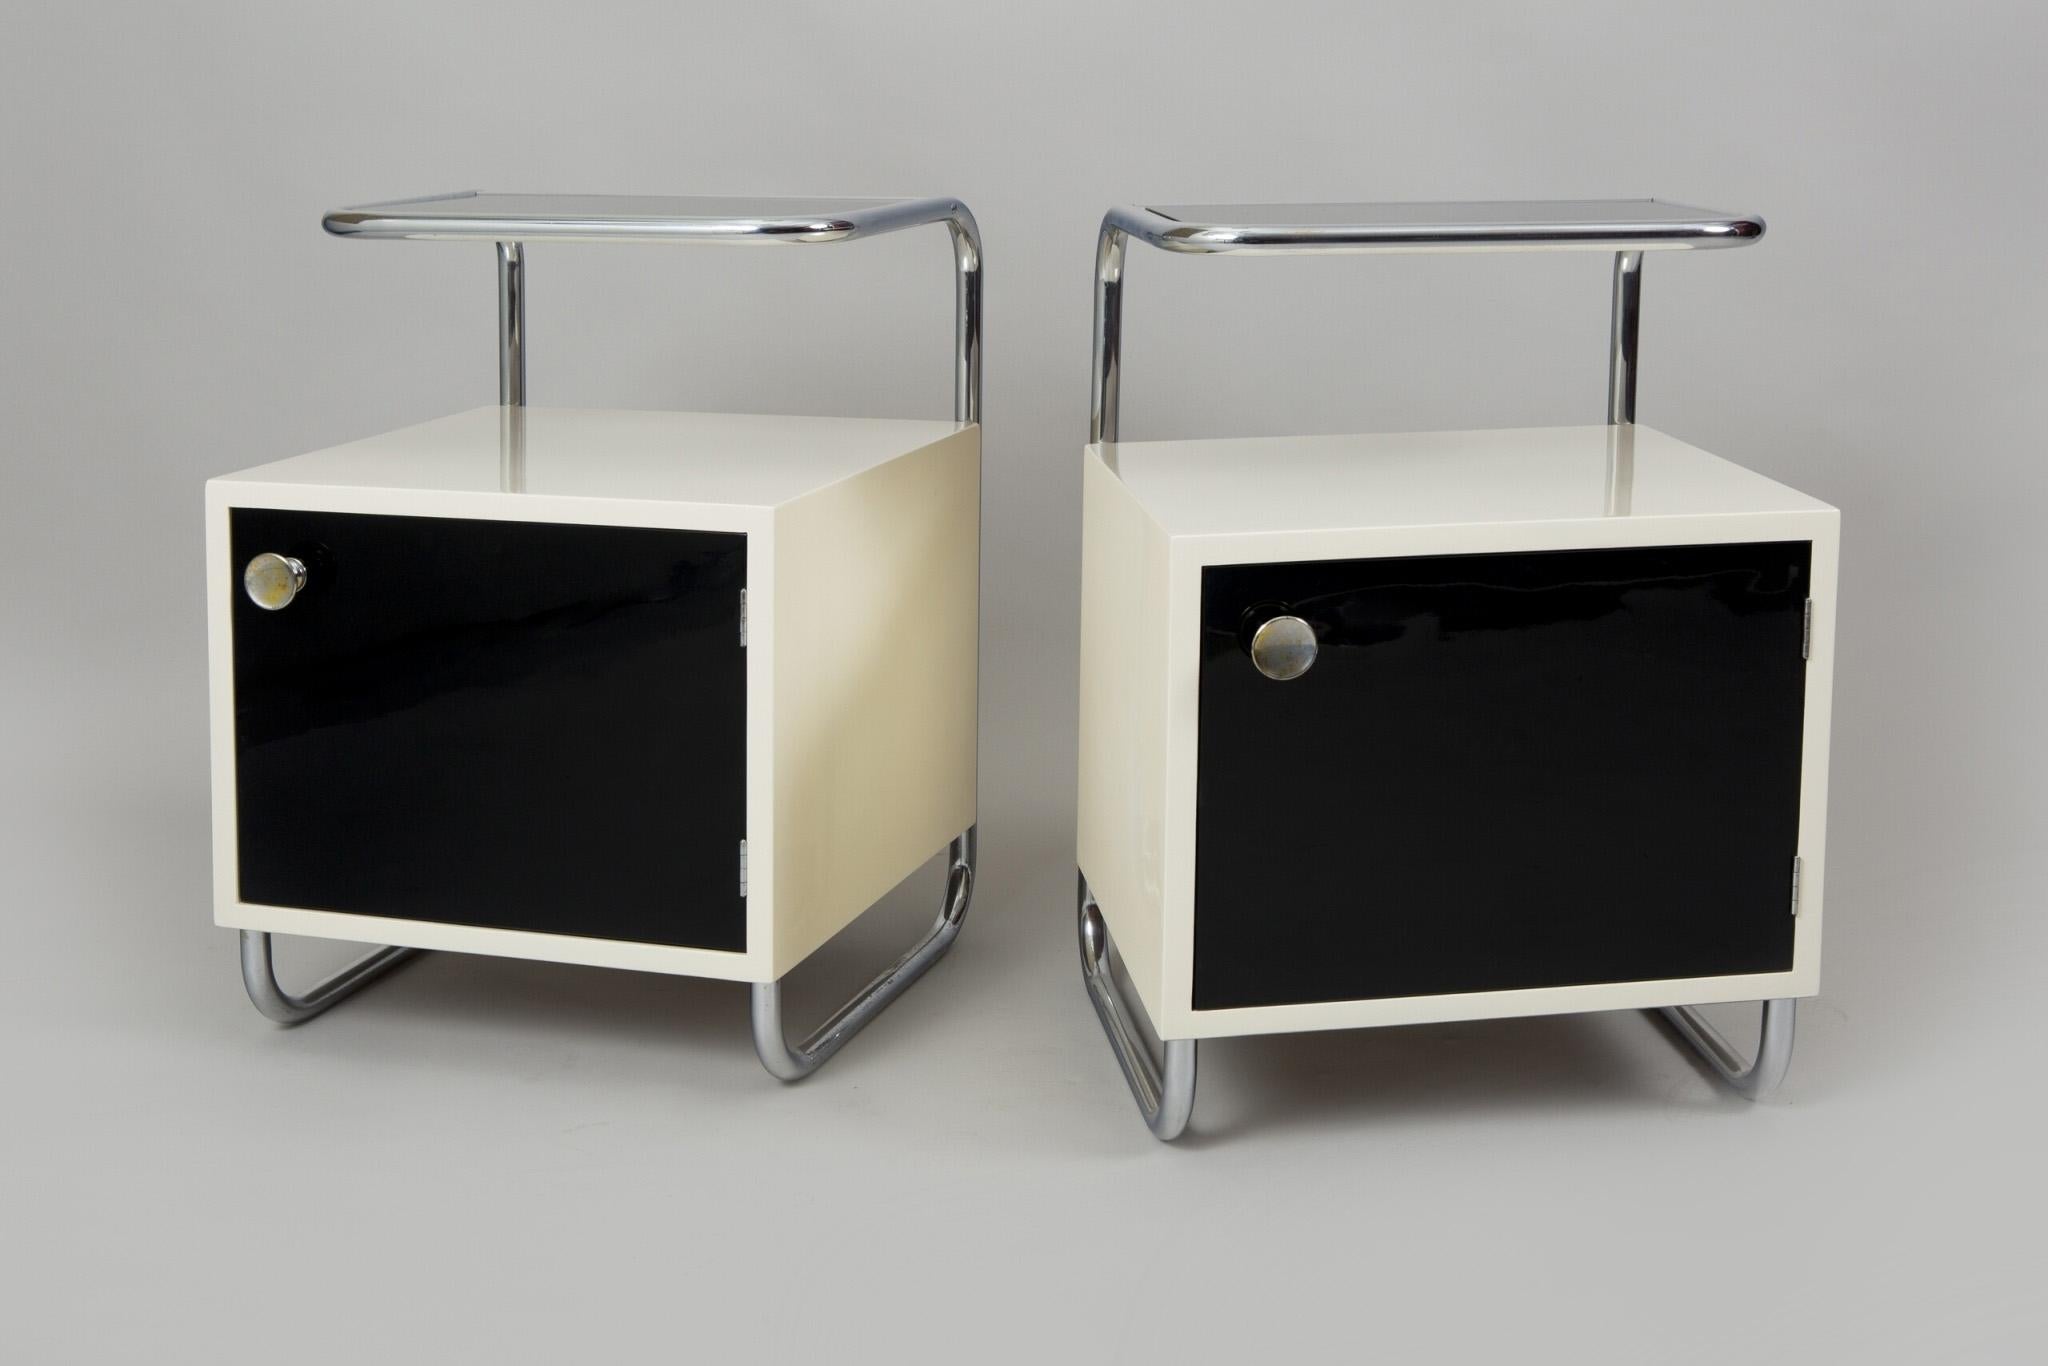 Pair of Art Deco bed-side tables from Czech Republic.
Completely restored, surface polished by piano lacquers.

Maker: Vichr a spol.